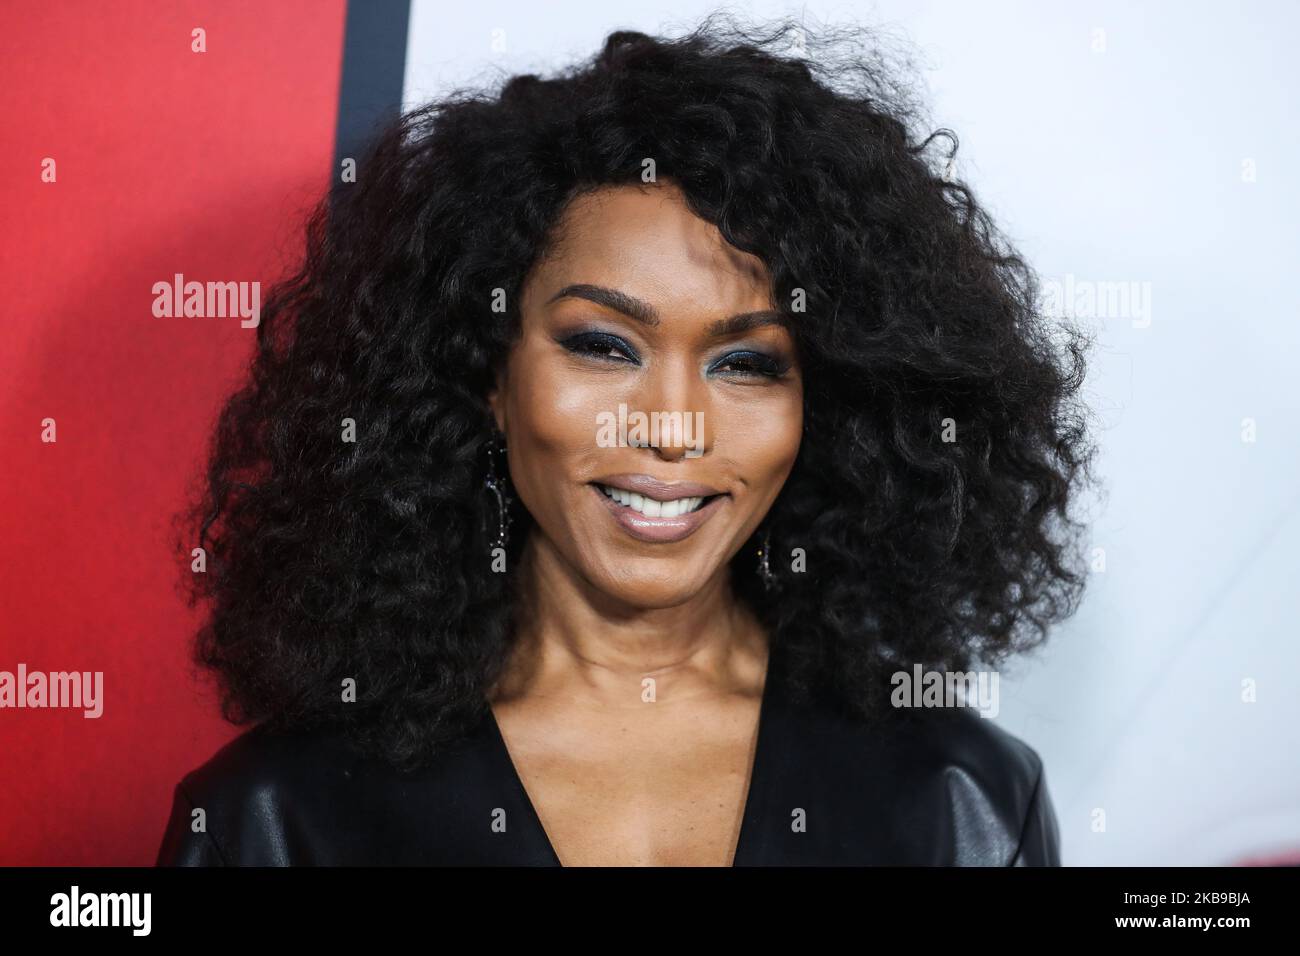 HOLLYWOOD, LOS ANGELES, CALIFORNIA, USA - OCTOBER 26: Actress Angela Bassett arrives at FX's 'American Horror Story' 100th Episode Celebration held at the Hollywood Forever Cemetery on October 26, 2019 in Hollywood, Los Angeles, California, United States. (Photo by Xavier Collin/Image Press Agency/NurPhoto) Stock Photo